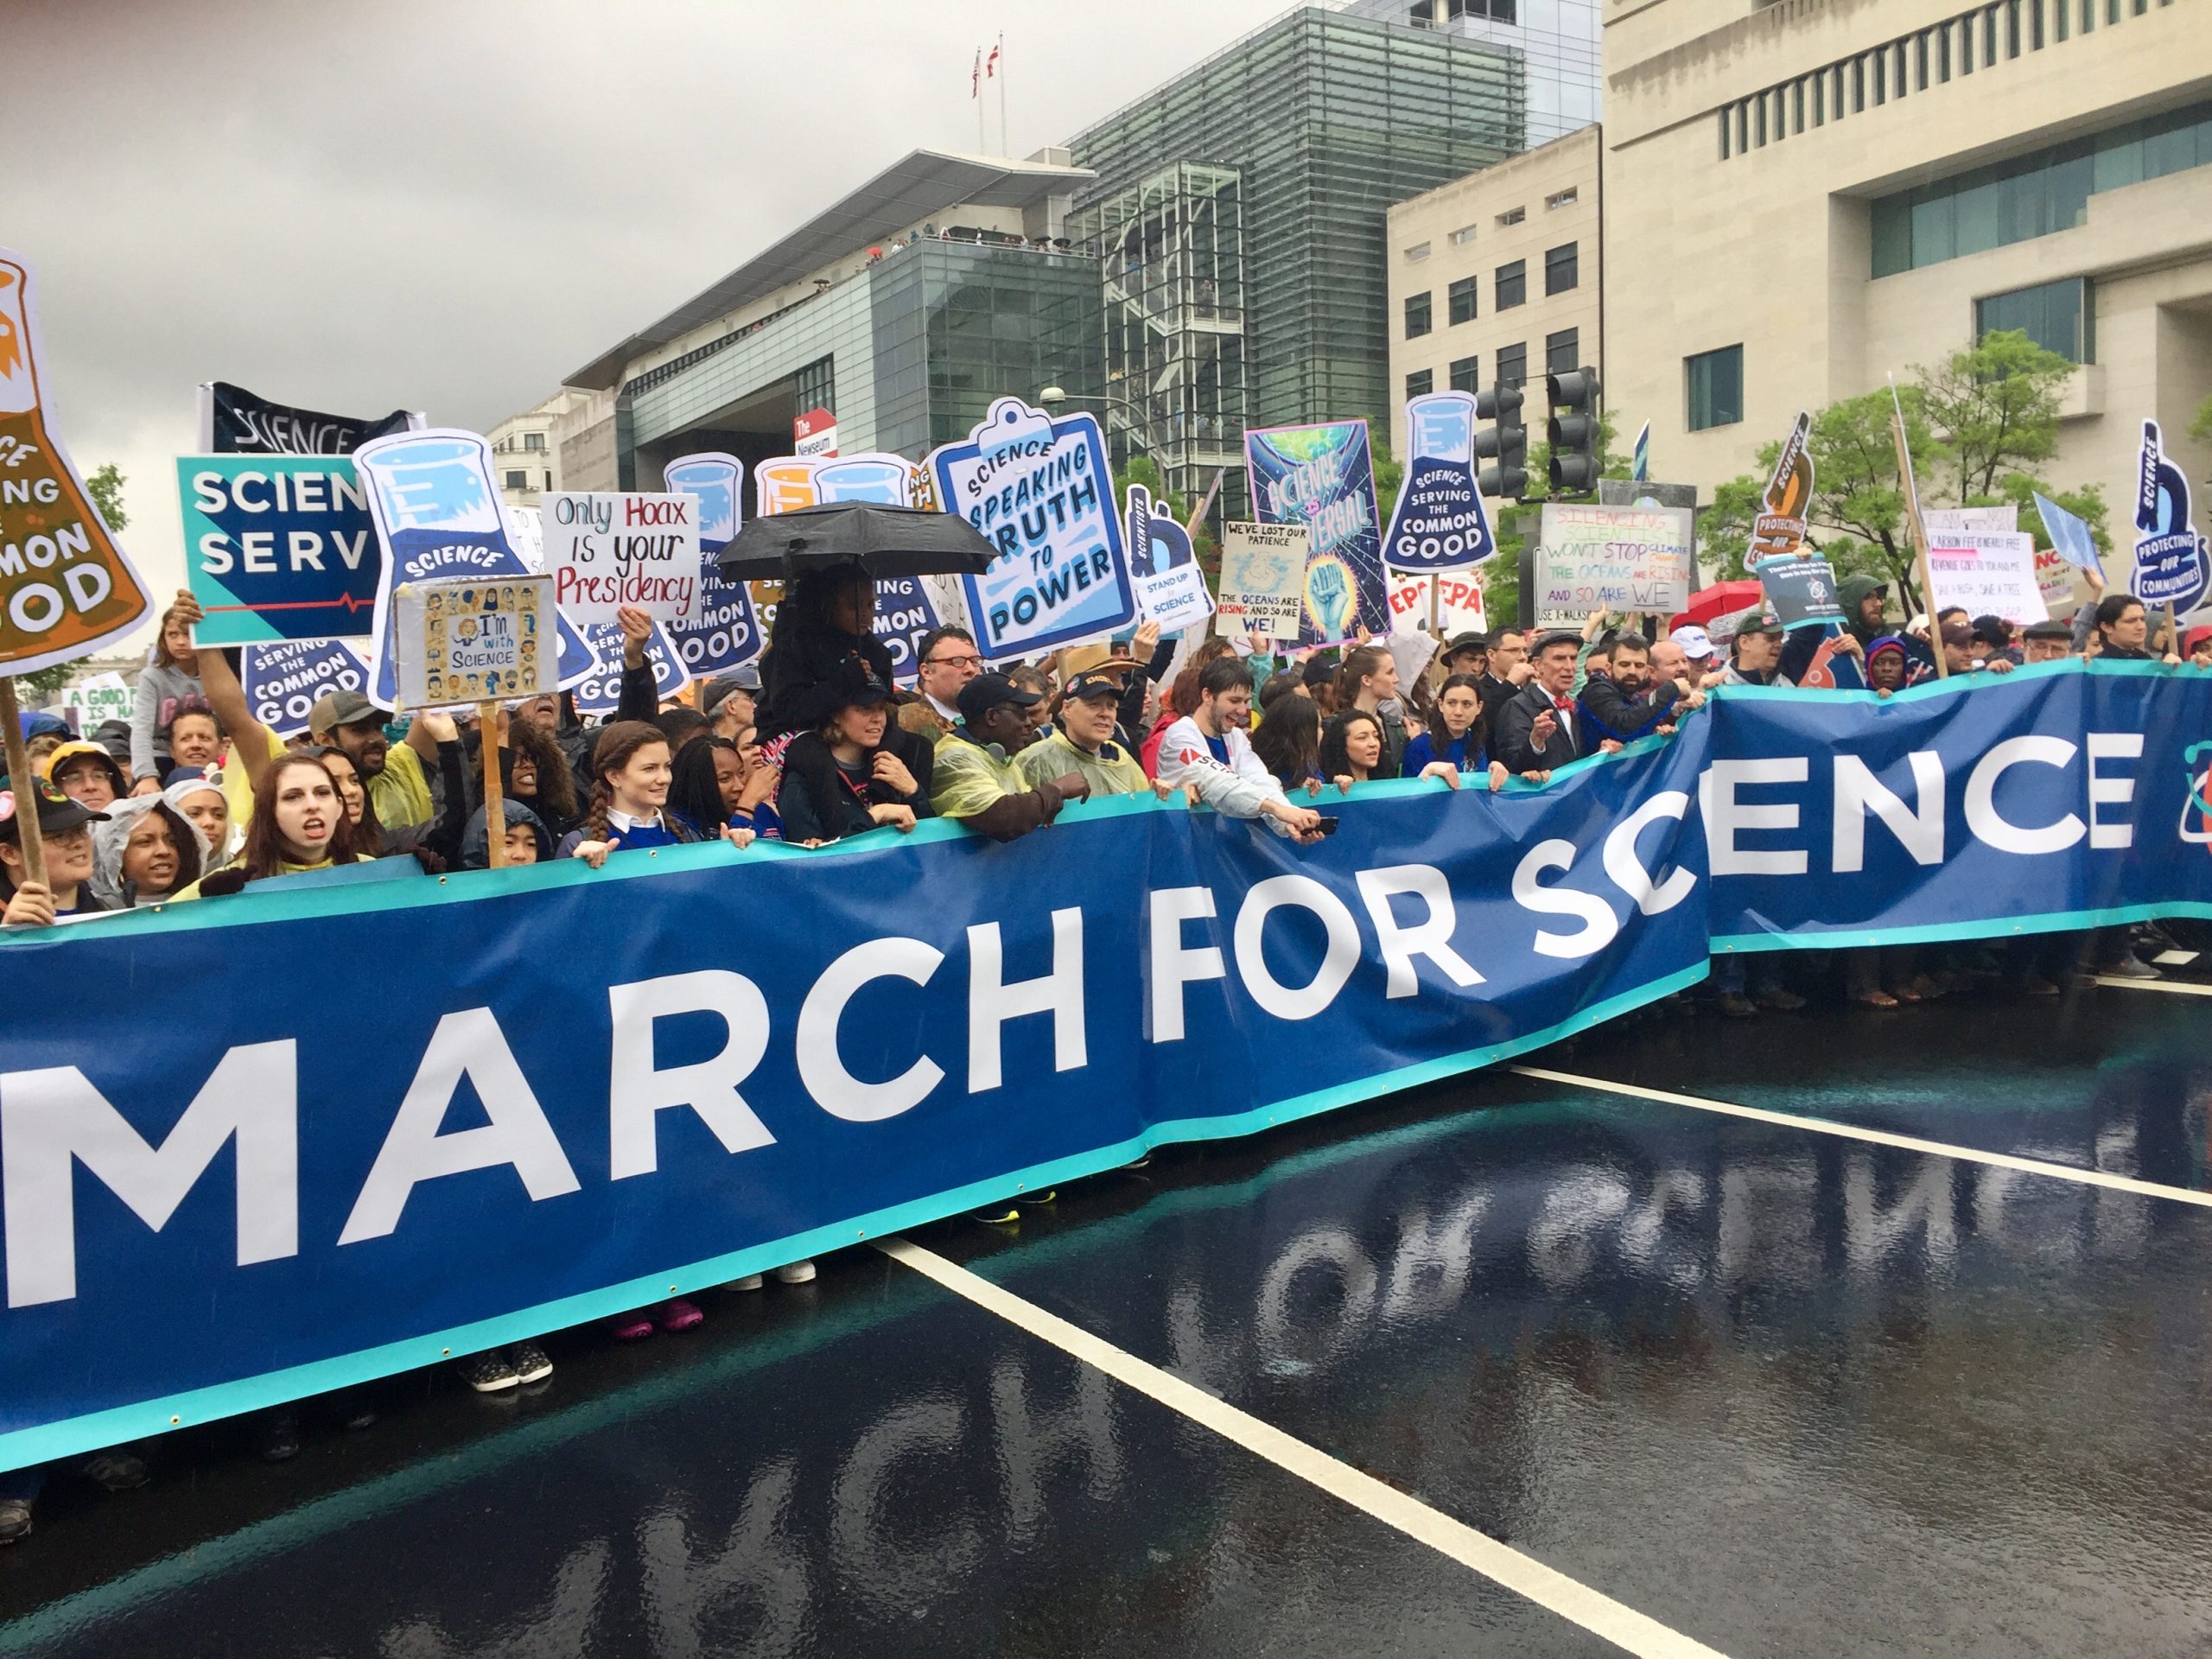 Huge crowd of people marching on the street holding a banner that says "March for Science"